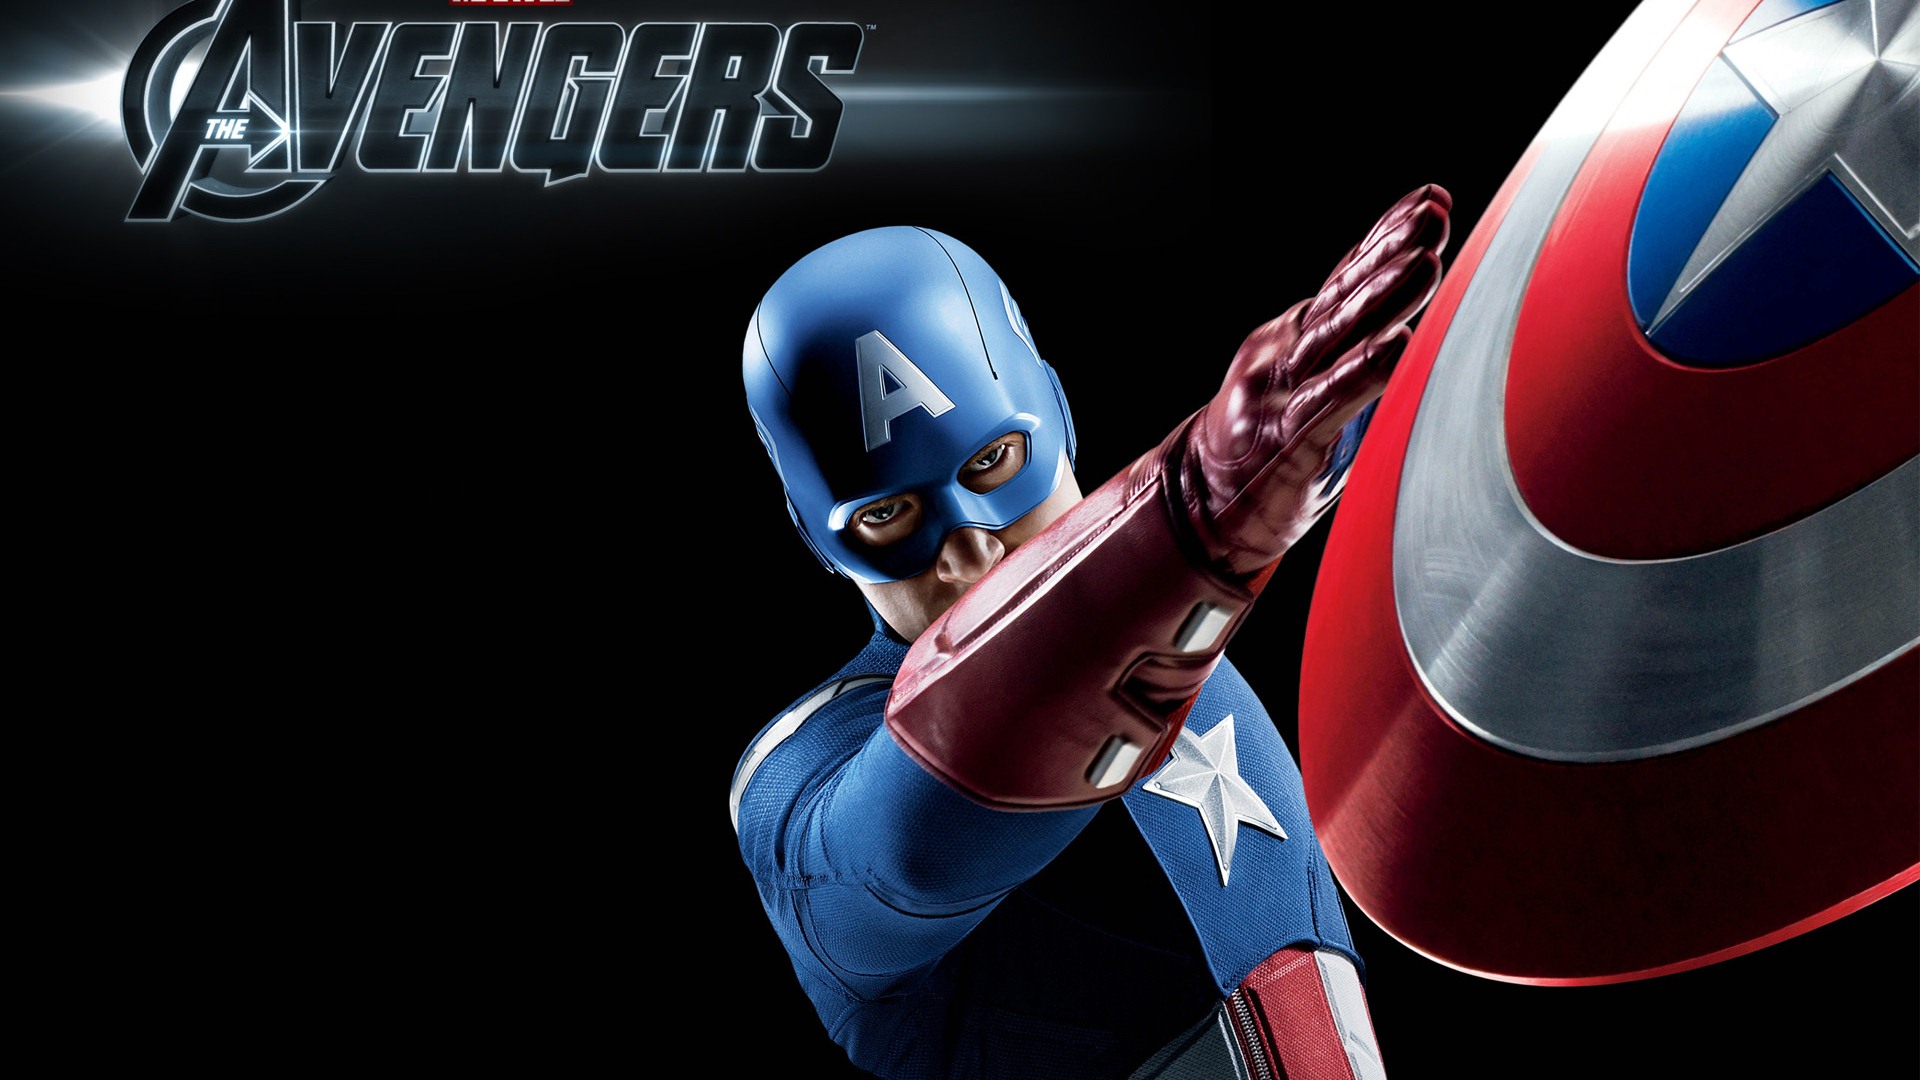 The Avengers 2012 HD wallpapers #6 - 1920x1080